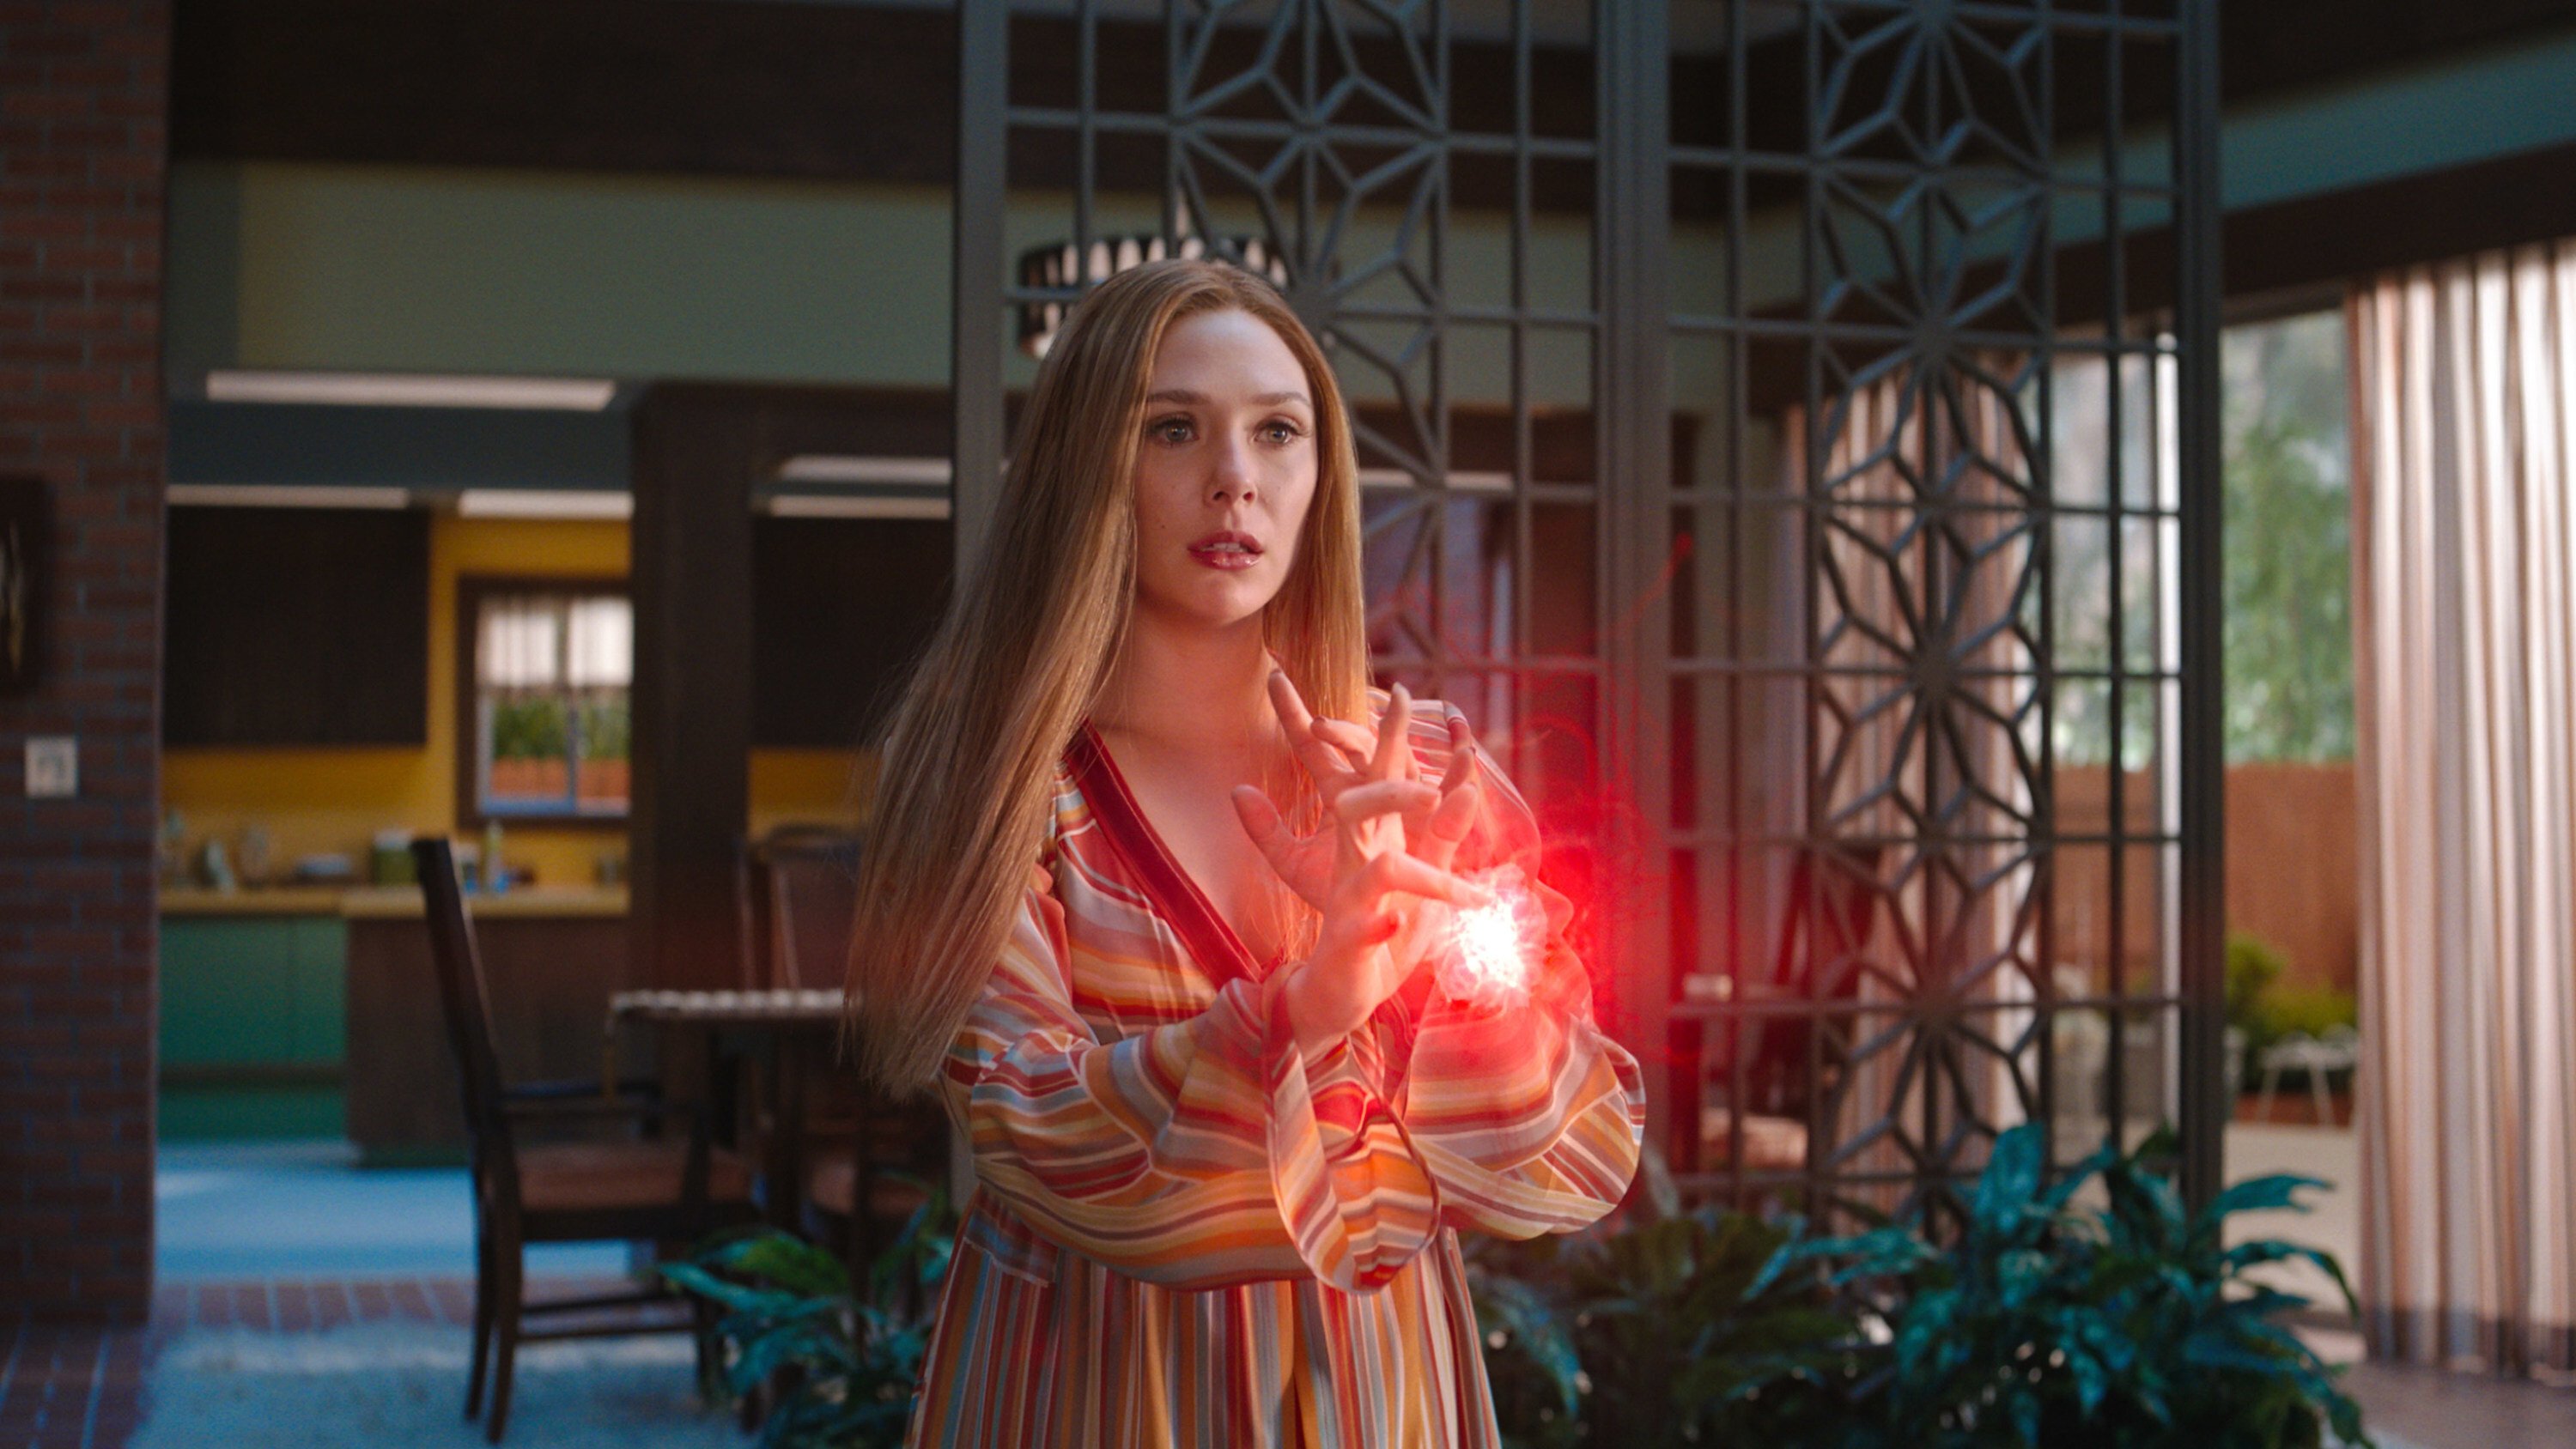 Elizabeth Olsen as Wanda Maximoff in a scene from WandaVision. Marvel Studios chief Kevin Feige says a second season is being considered for the show on Disney+. Photo: Marvel Studios via AP